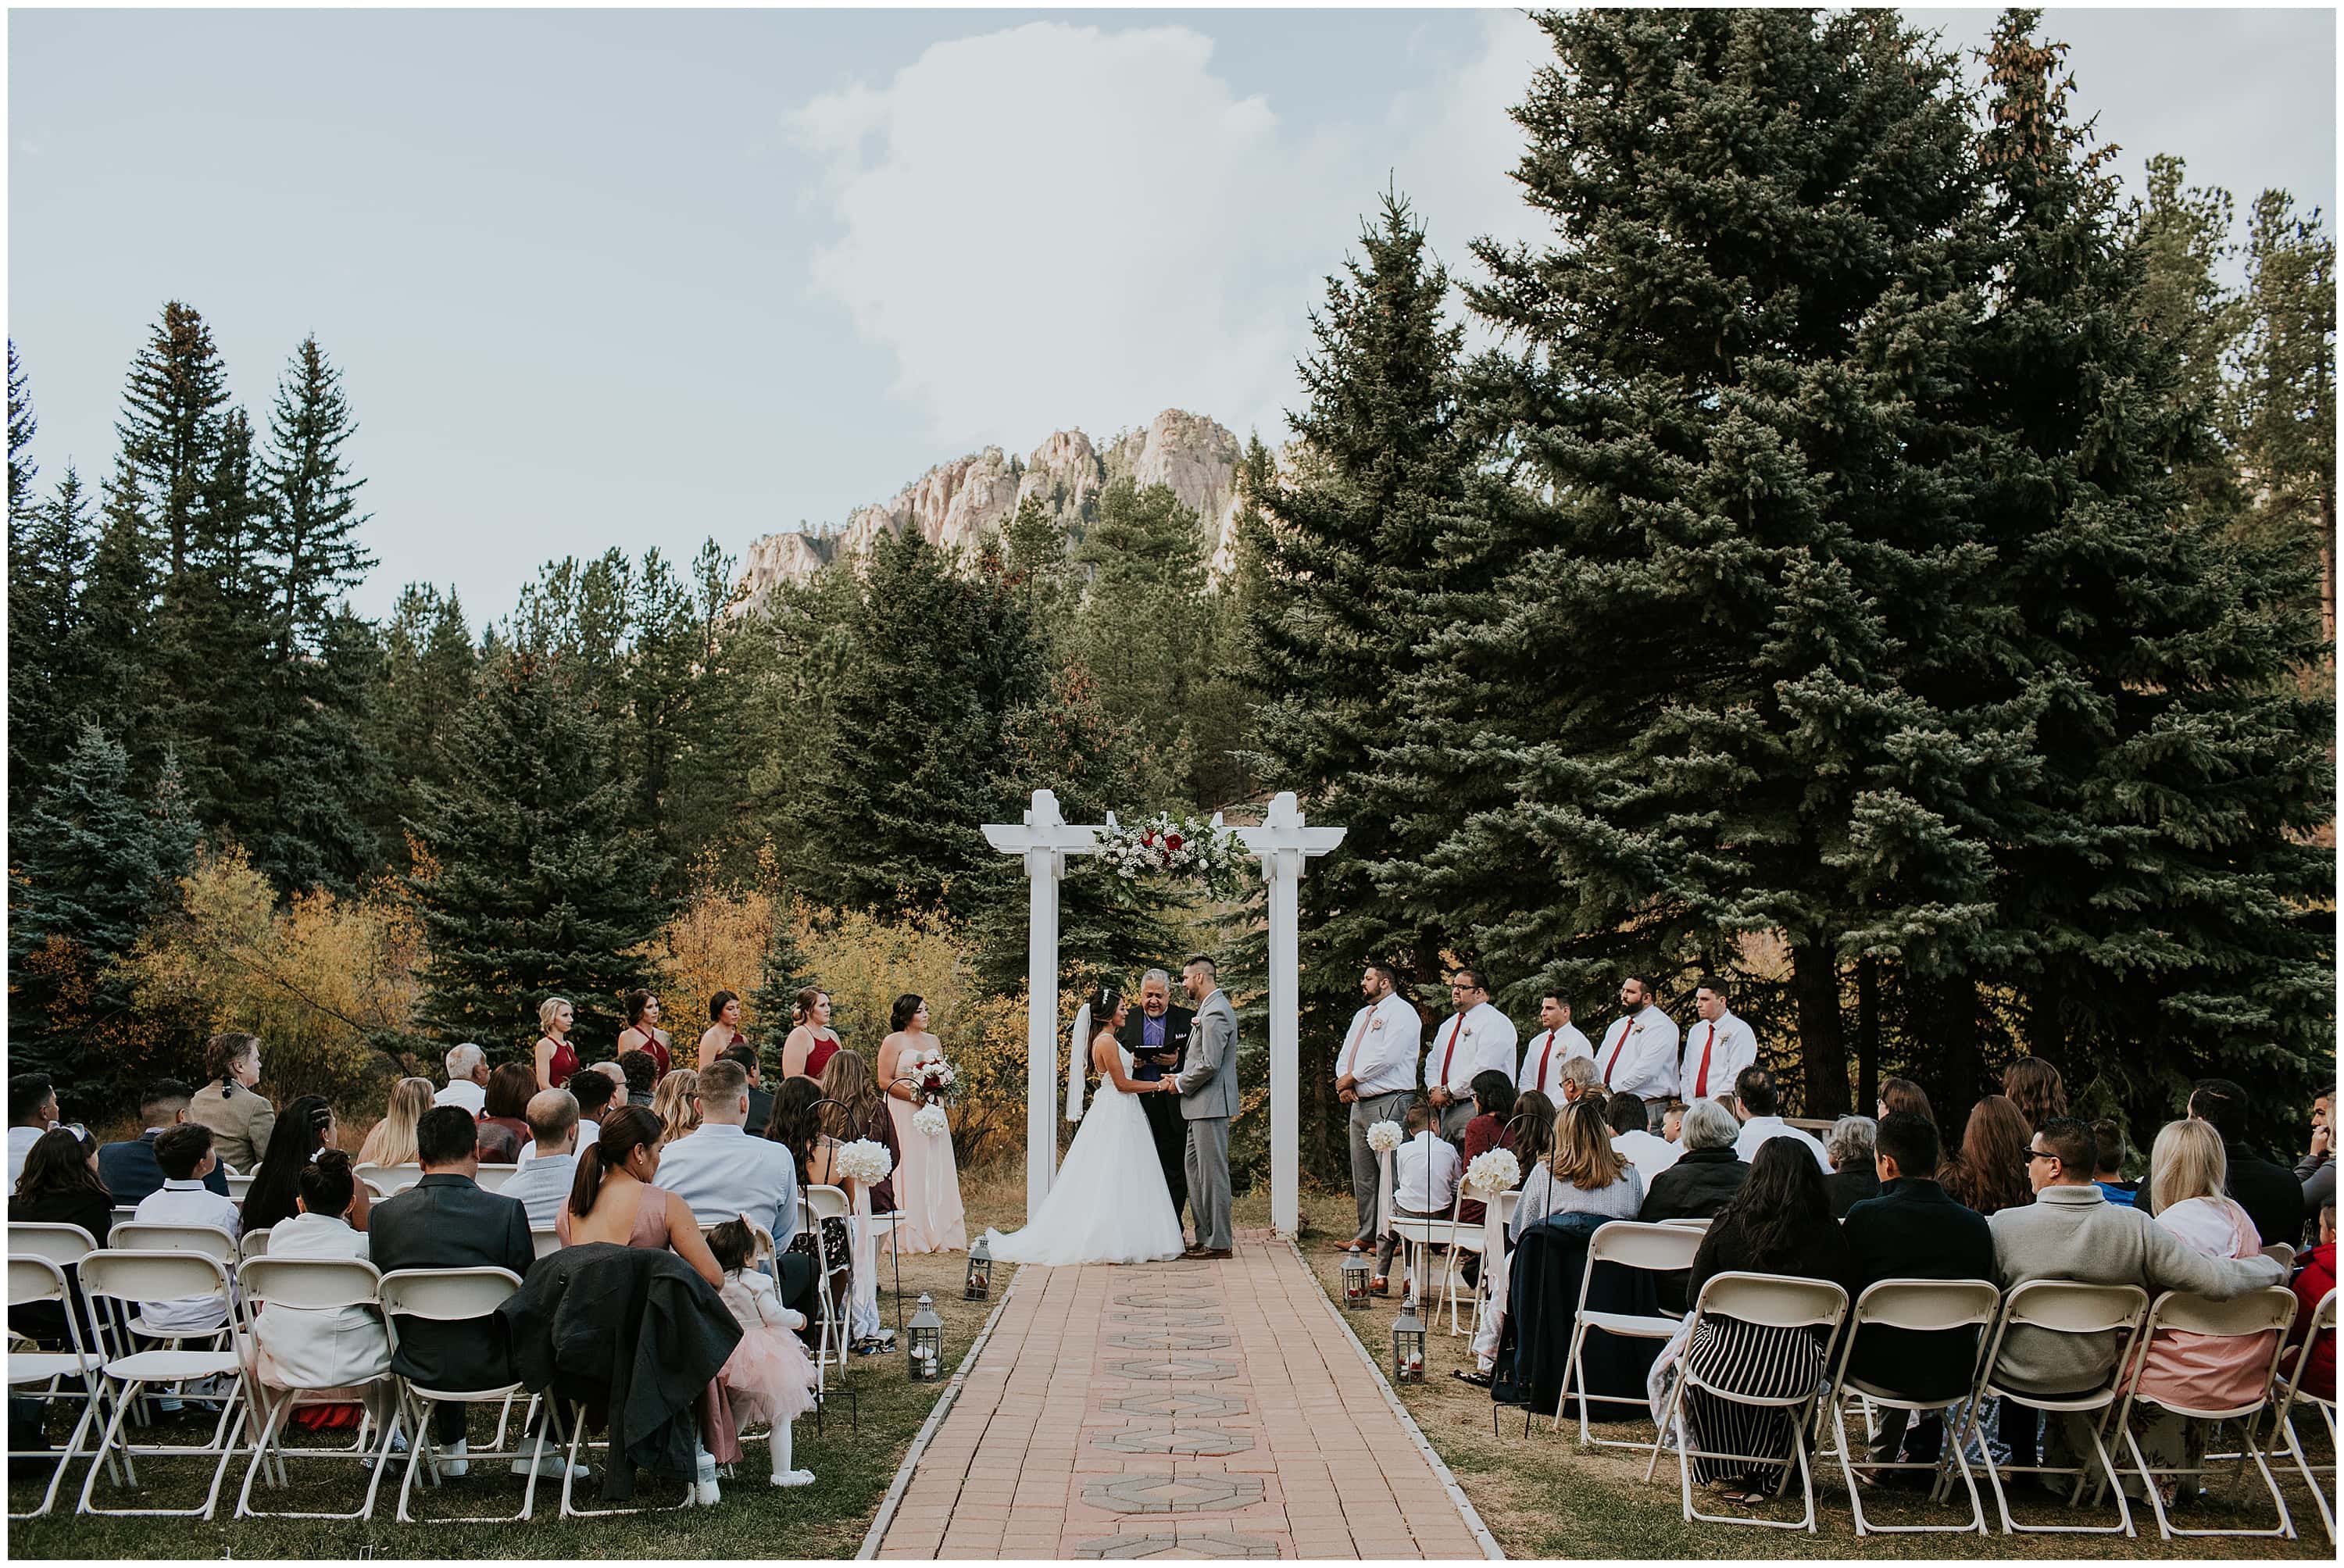 Monutain View Ranch Wedgewood Wedding Photographer, Monutain View Ranch Wedgewood Fall Wedding Photographer, Mountain View Ranch, Fall Mountain wedding, Colorado mountain wedding, Wedgewood weddings, Fall wedding, hispanic couple, reception group photo, Outdoor mountain ceremony, Colorado outdoor ceremony, fall outdoor ceremony, converse shoes, cake cutting, bird cake topper, red & pink bridesmaids dresses, grey grooms suit